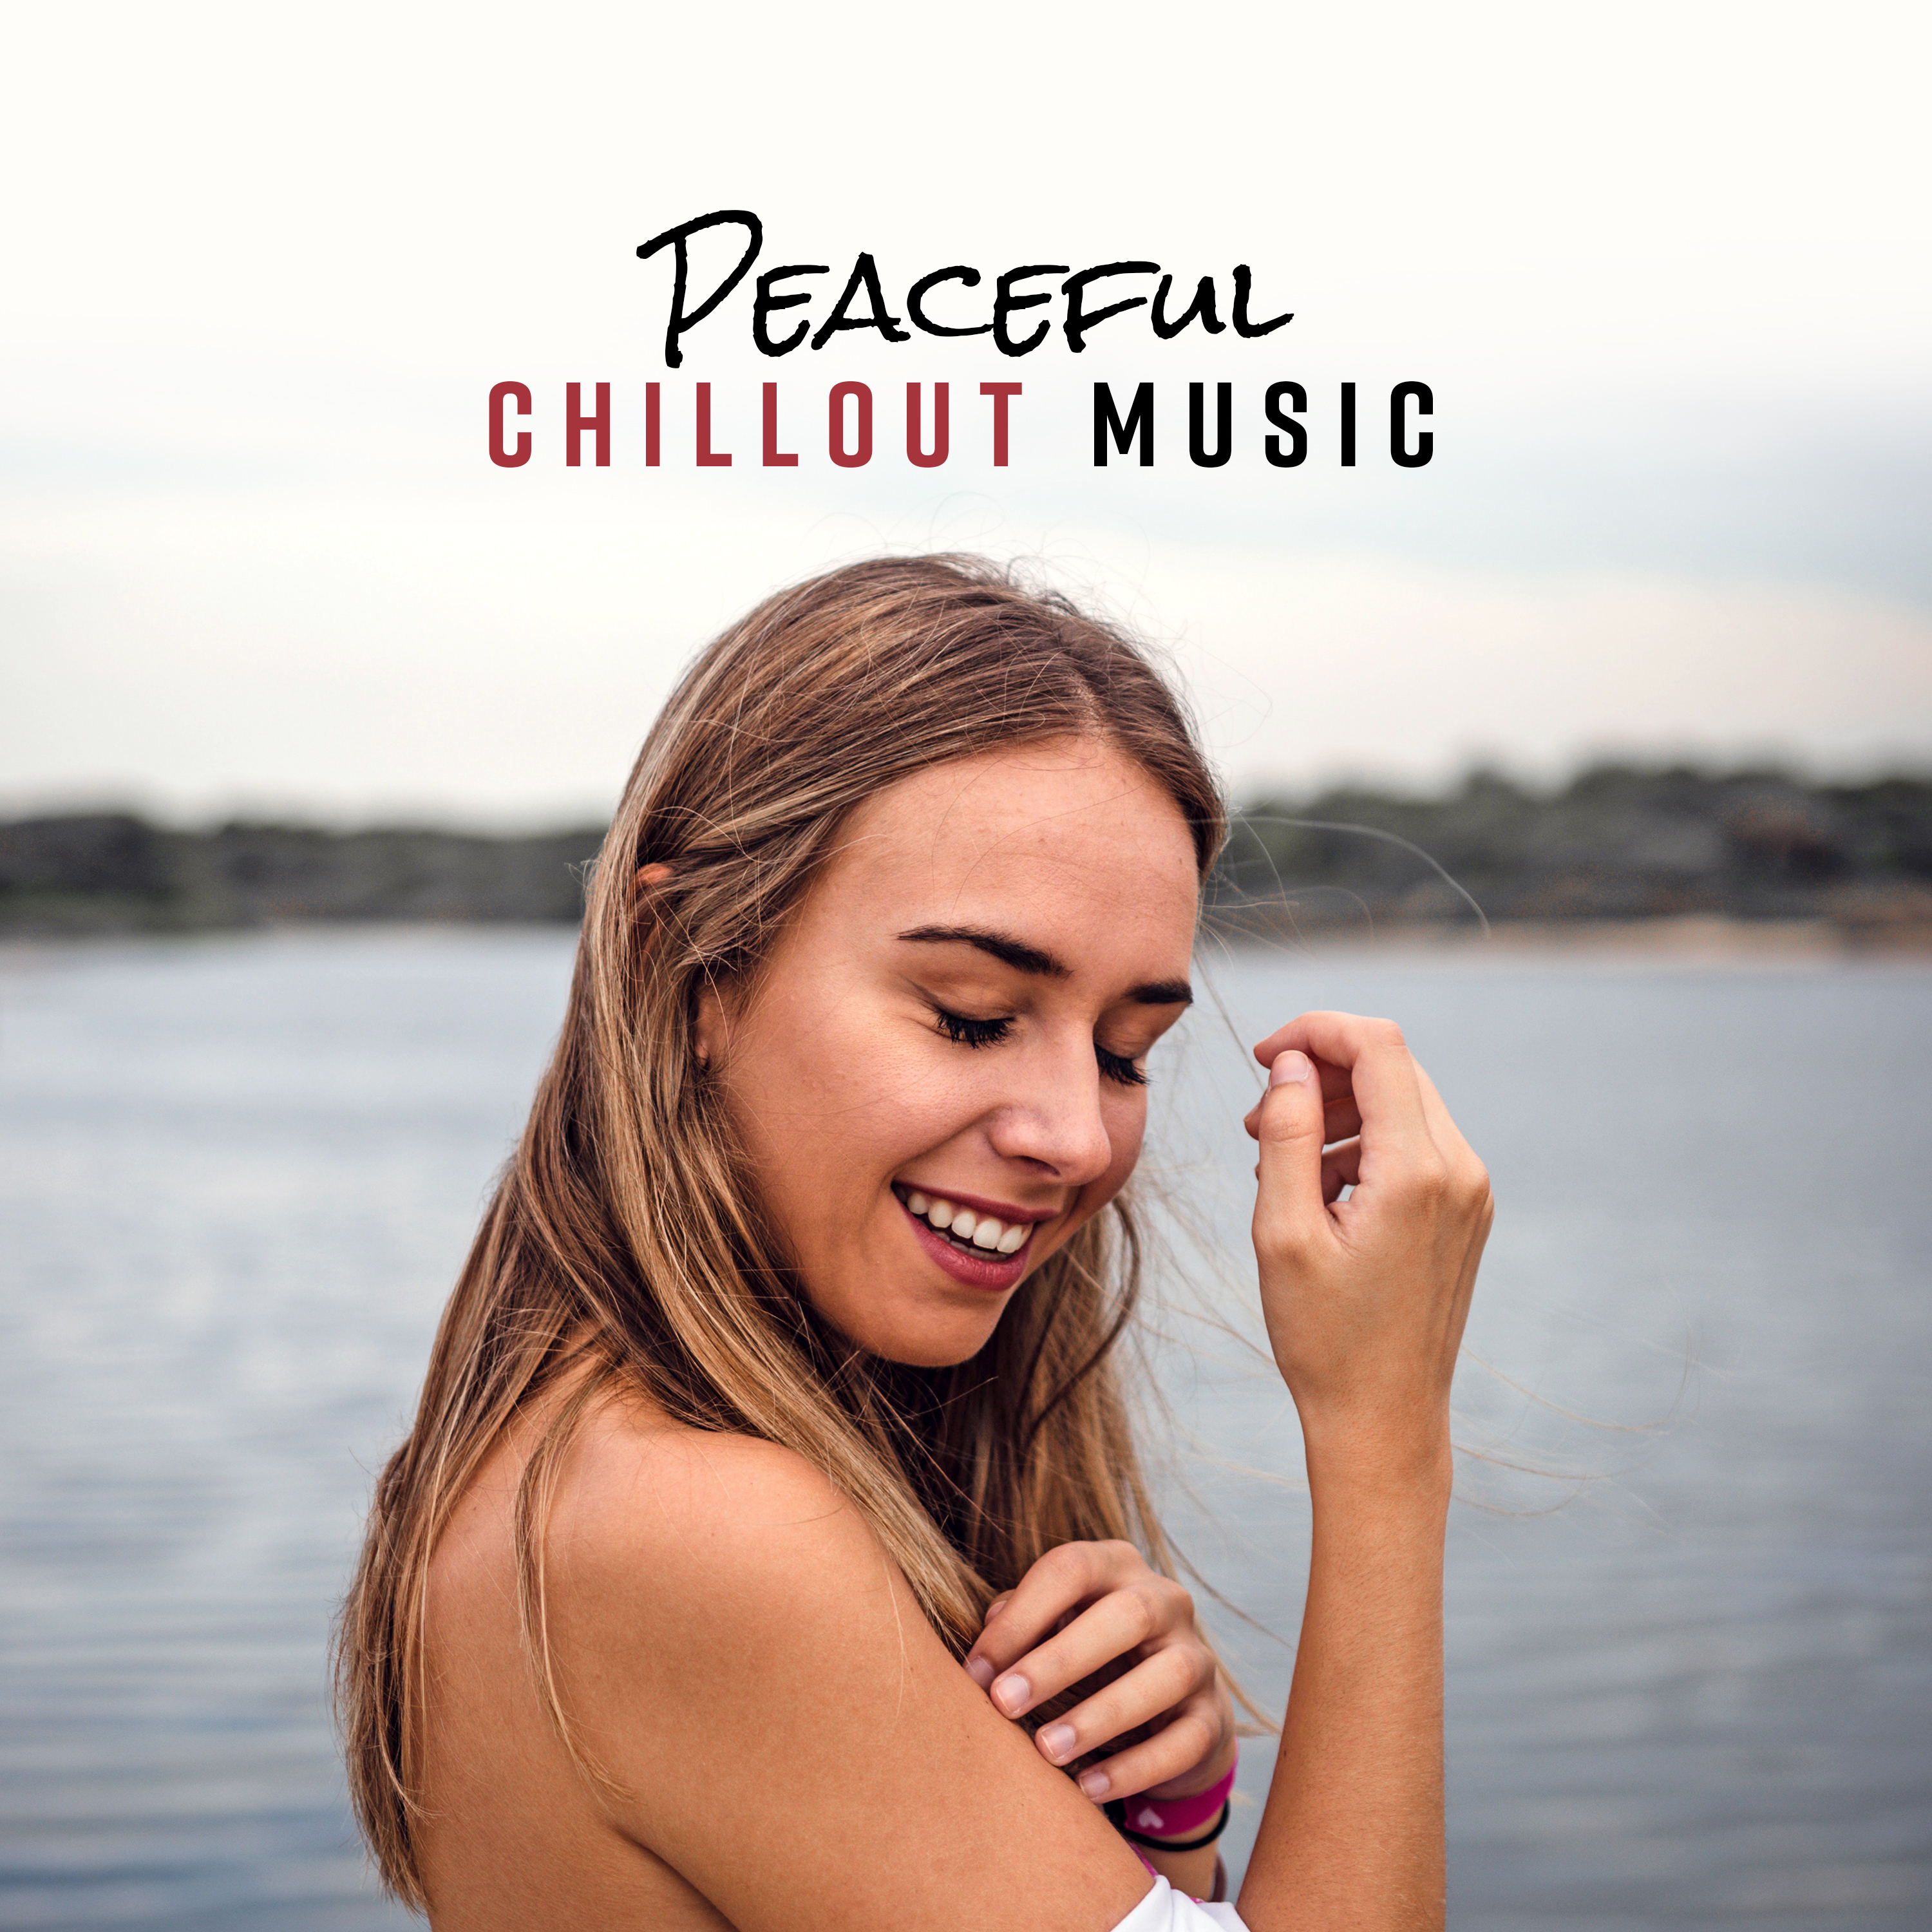 Peaceful Chillout Music